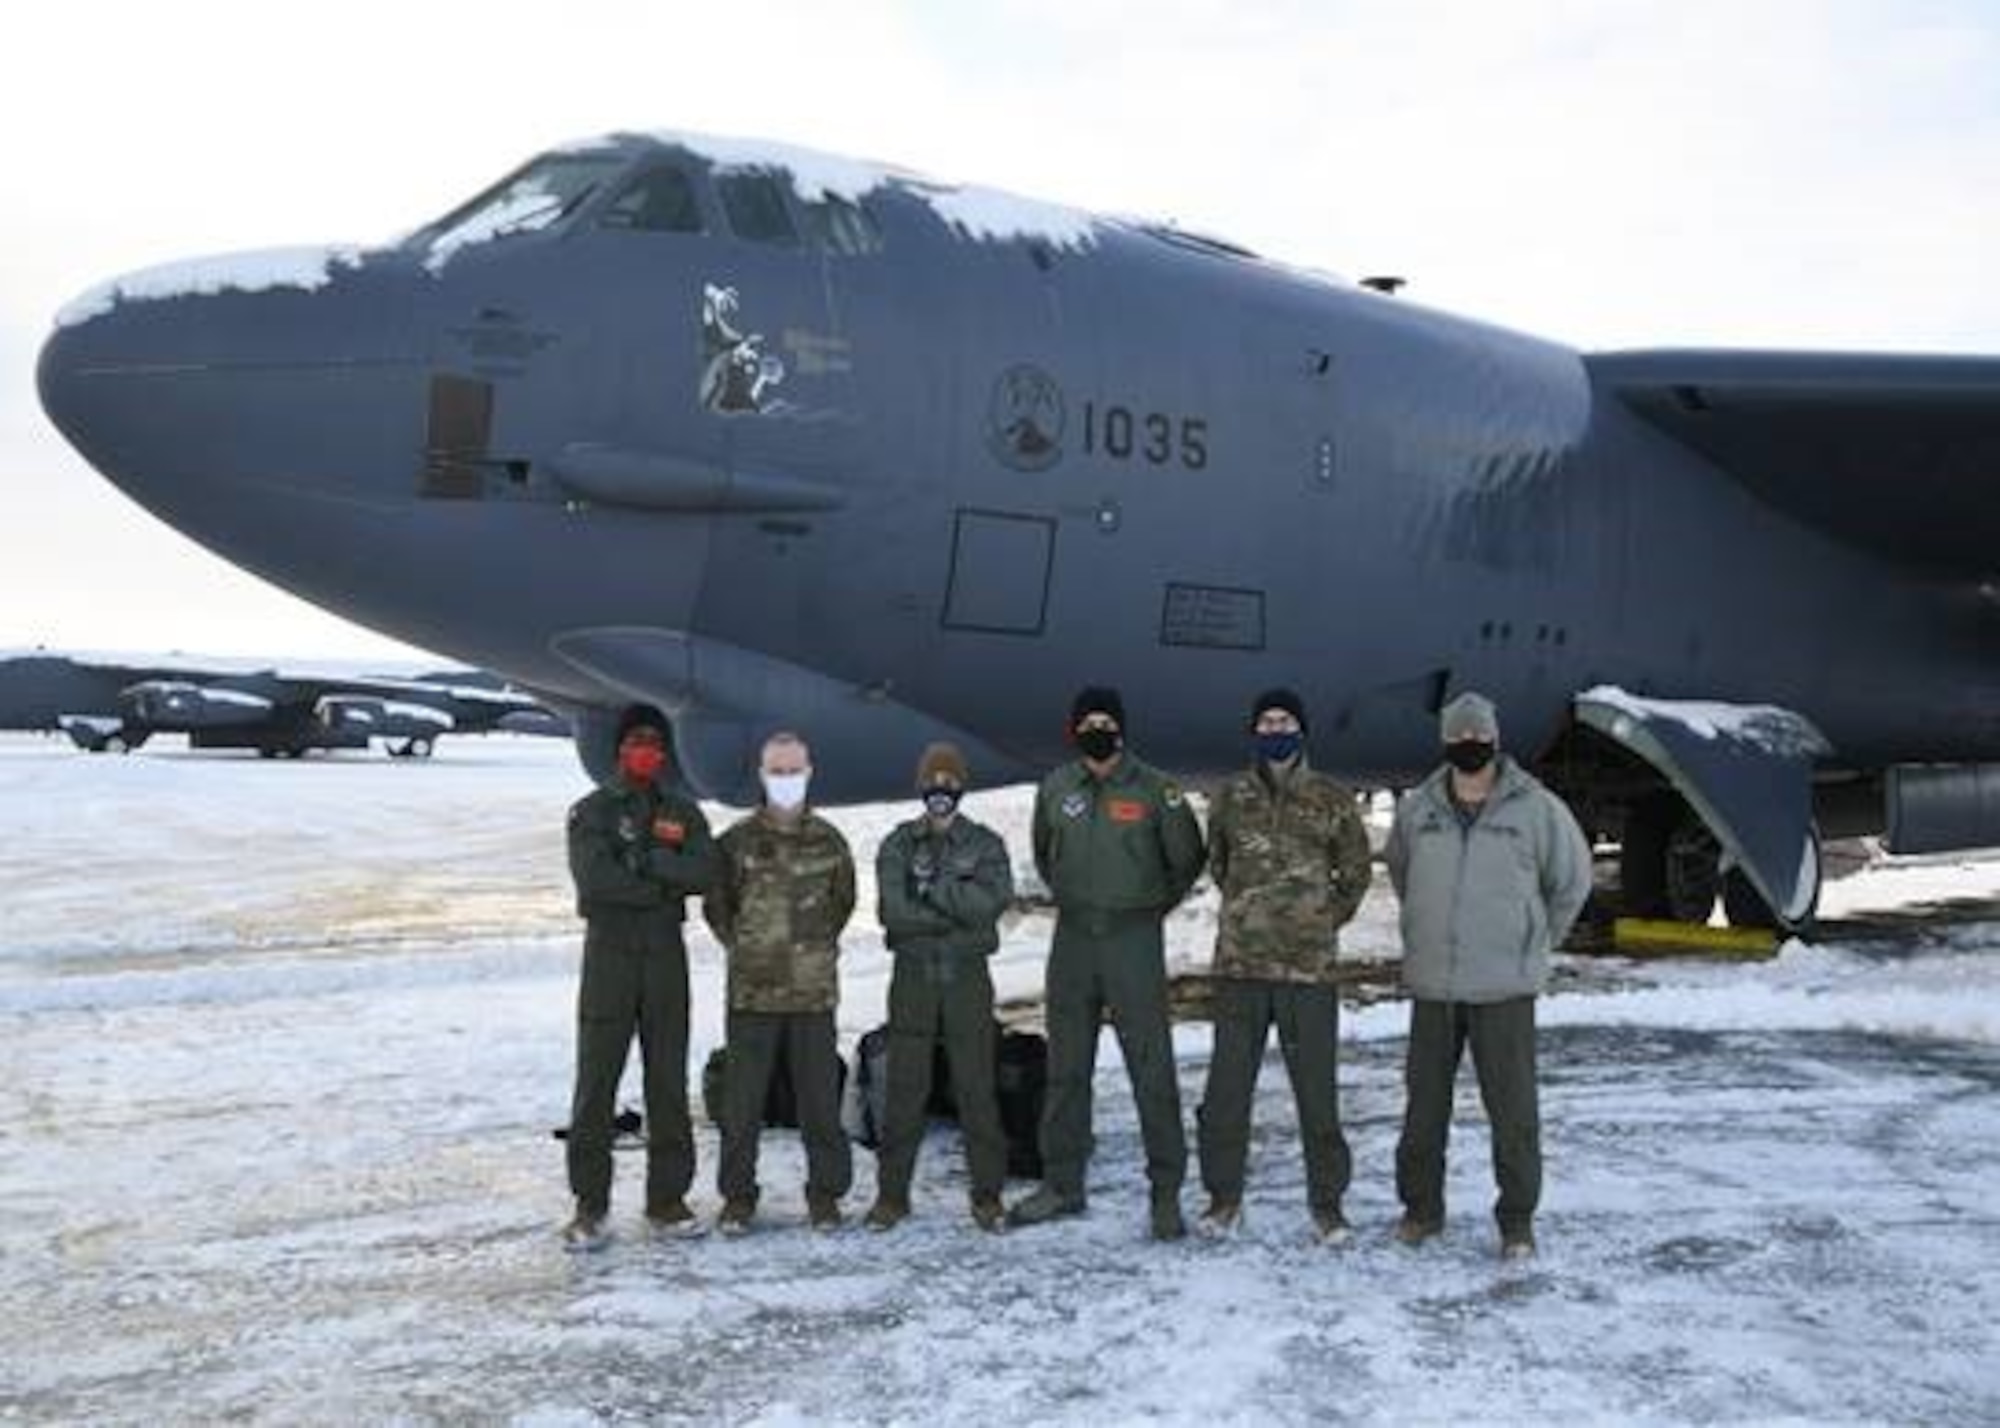 Honorable Sean Sipma, mayor of Minot, North Dakota, Lt. Colonel Brad Haynes, 5th Operations Support Squadron commander, and the flight crew pose in front of a B-52 Feb. 24, 2021 at Minot Air Force Base, North Dakota. Minot AFB often gives incentive flights to strengthen relationships between Team Minot and Minot township.